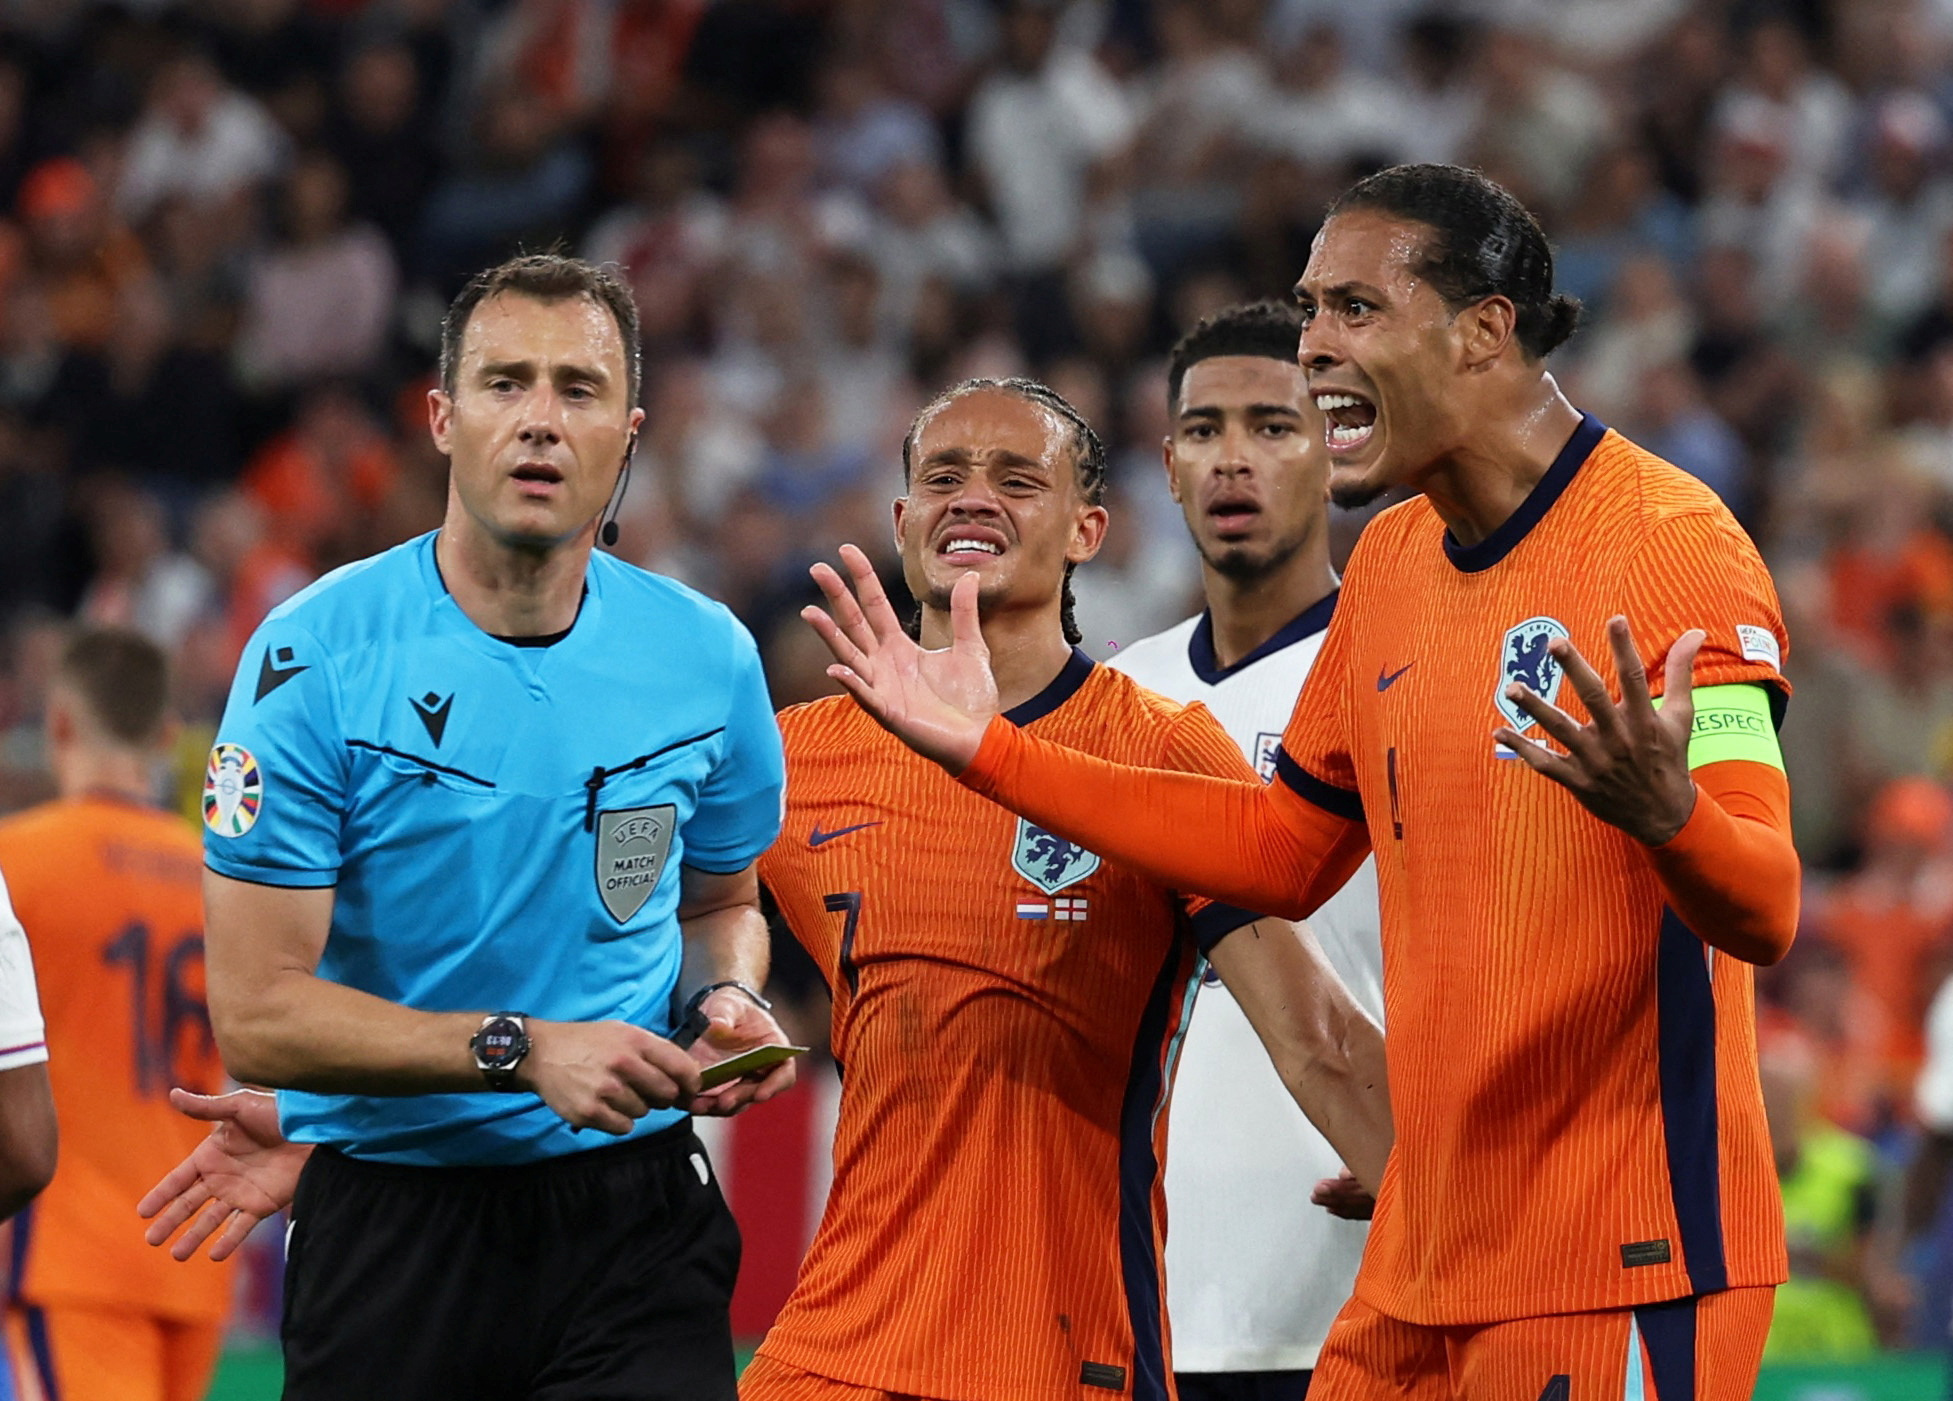 Van Dijk to Reevaluate Club and Country Commitments After Dutch Defeat